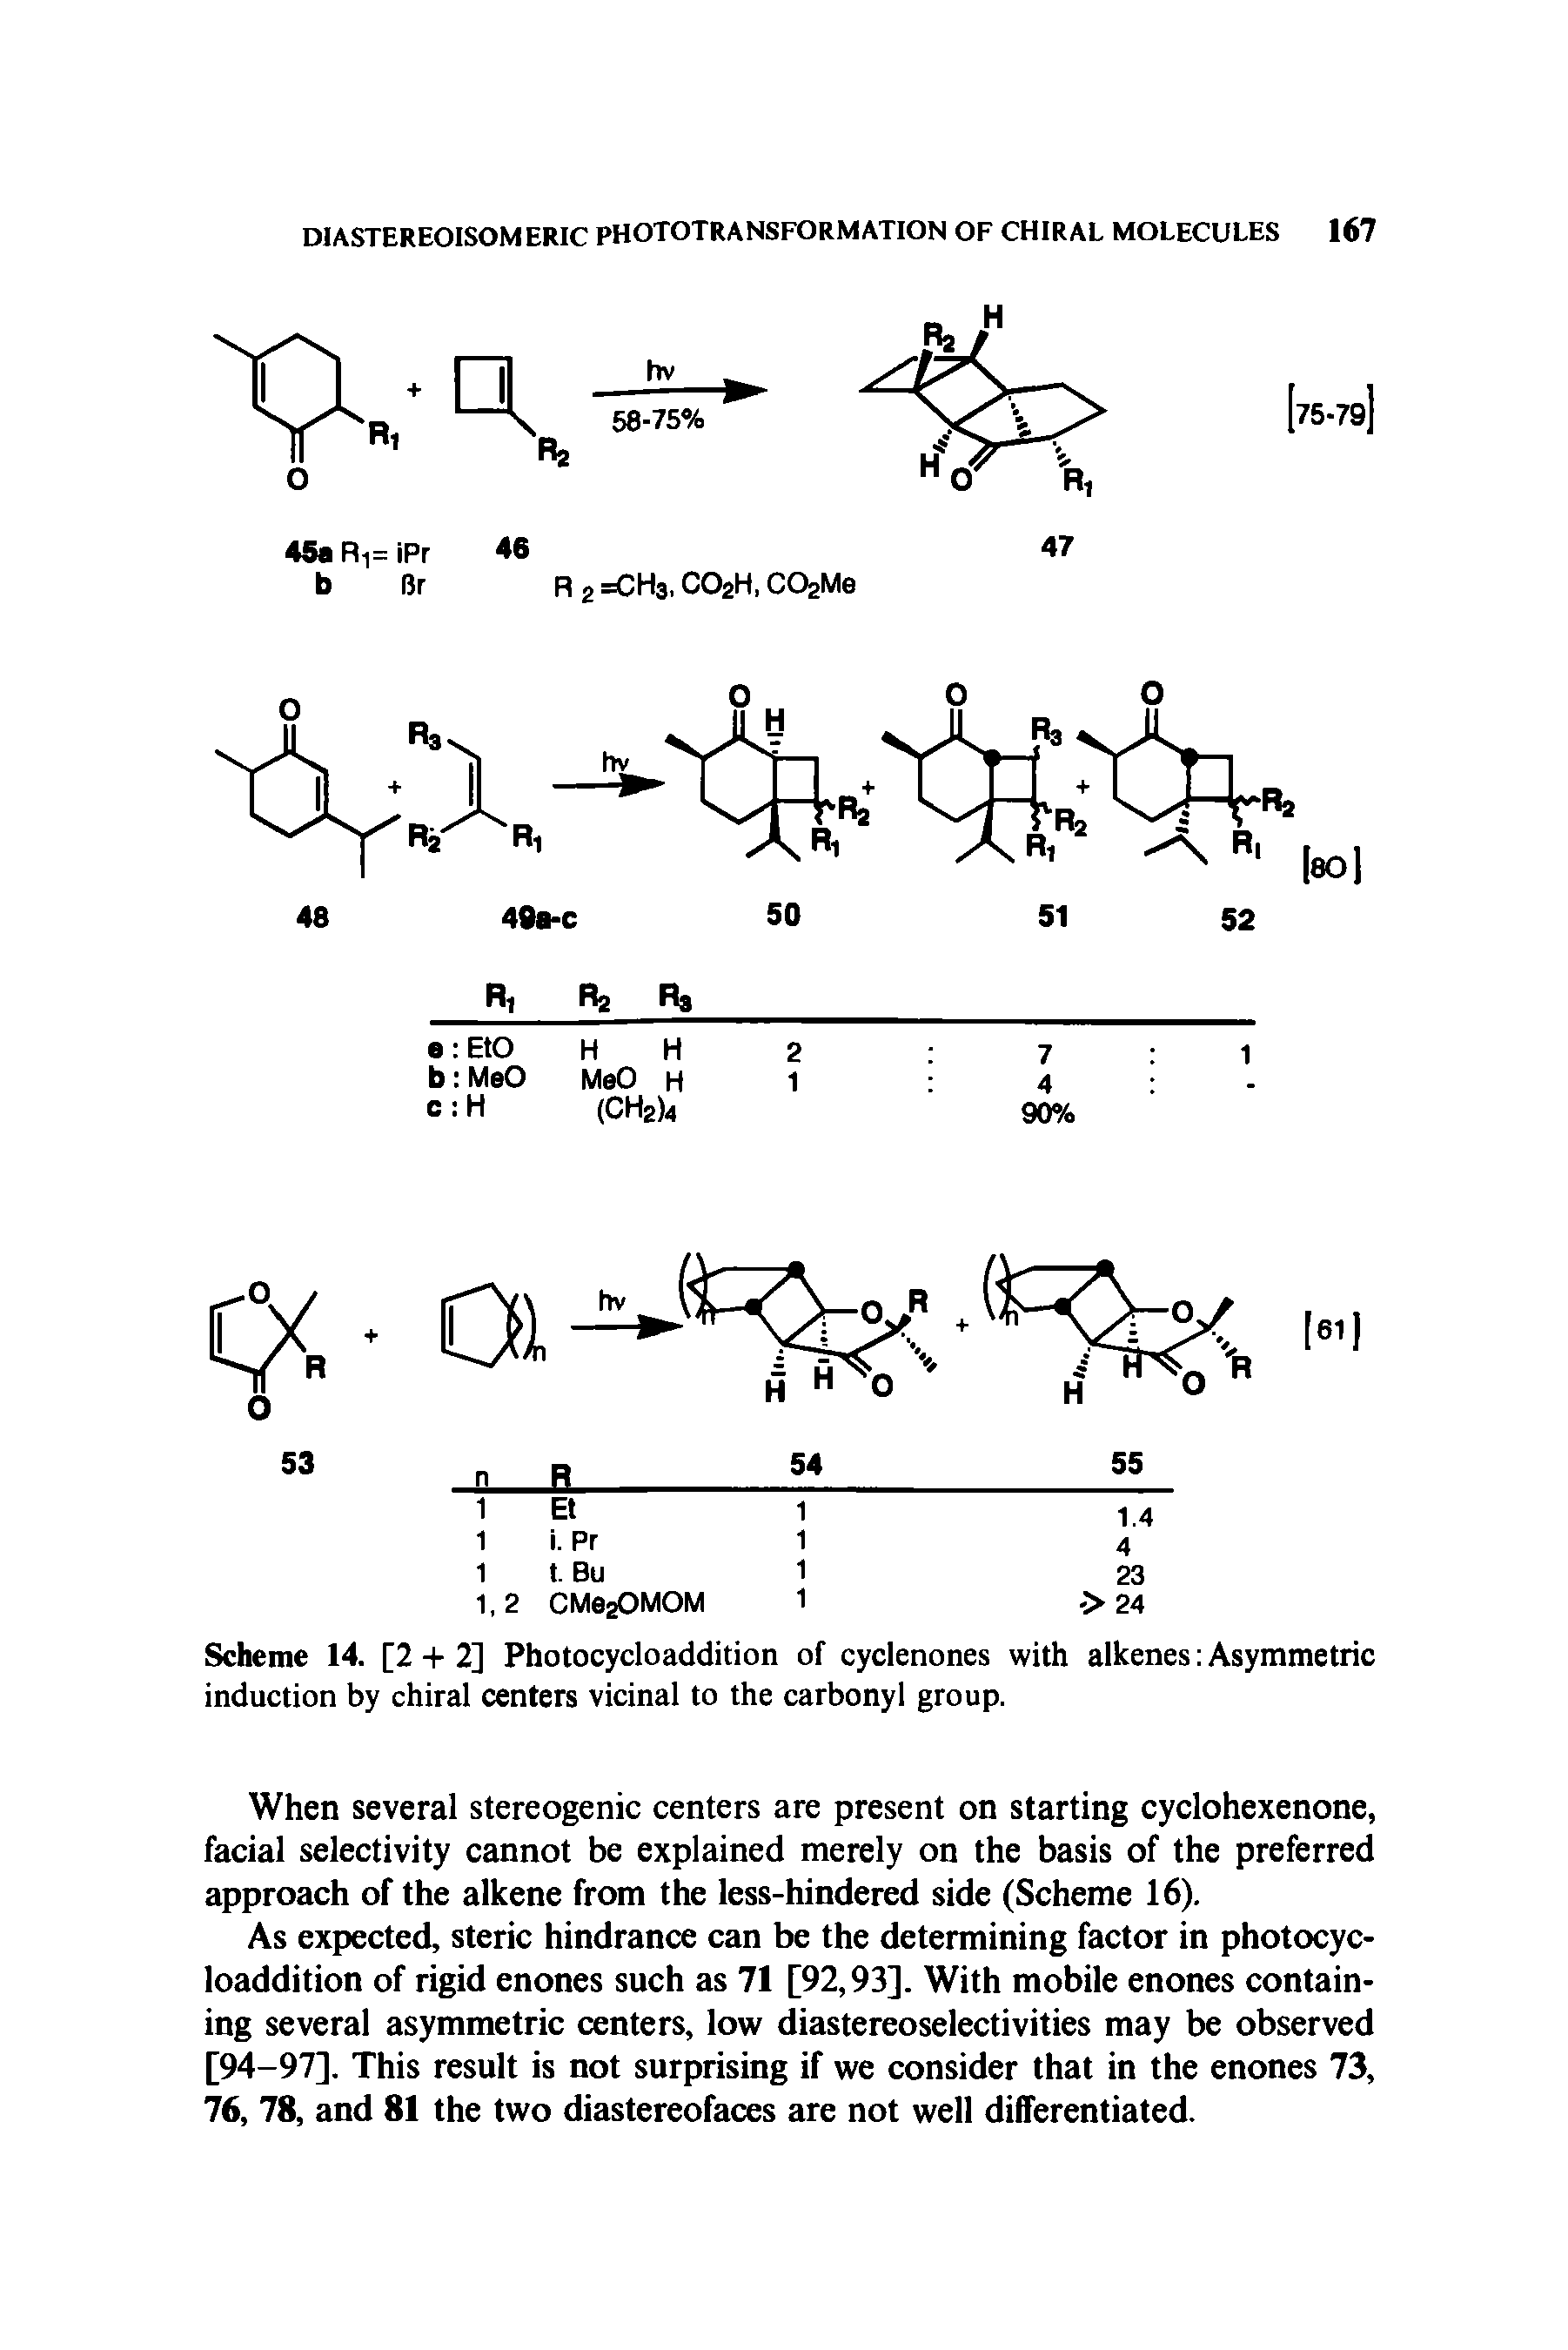 Scheme 14. [2 + 2] Photocycloaddition of cyclenones with alkenes Asymmetric induction by chiral centers vicinal to the carbonyl group.